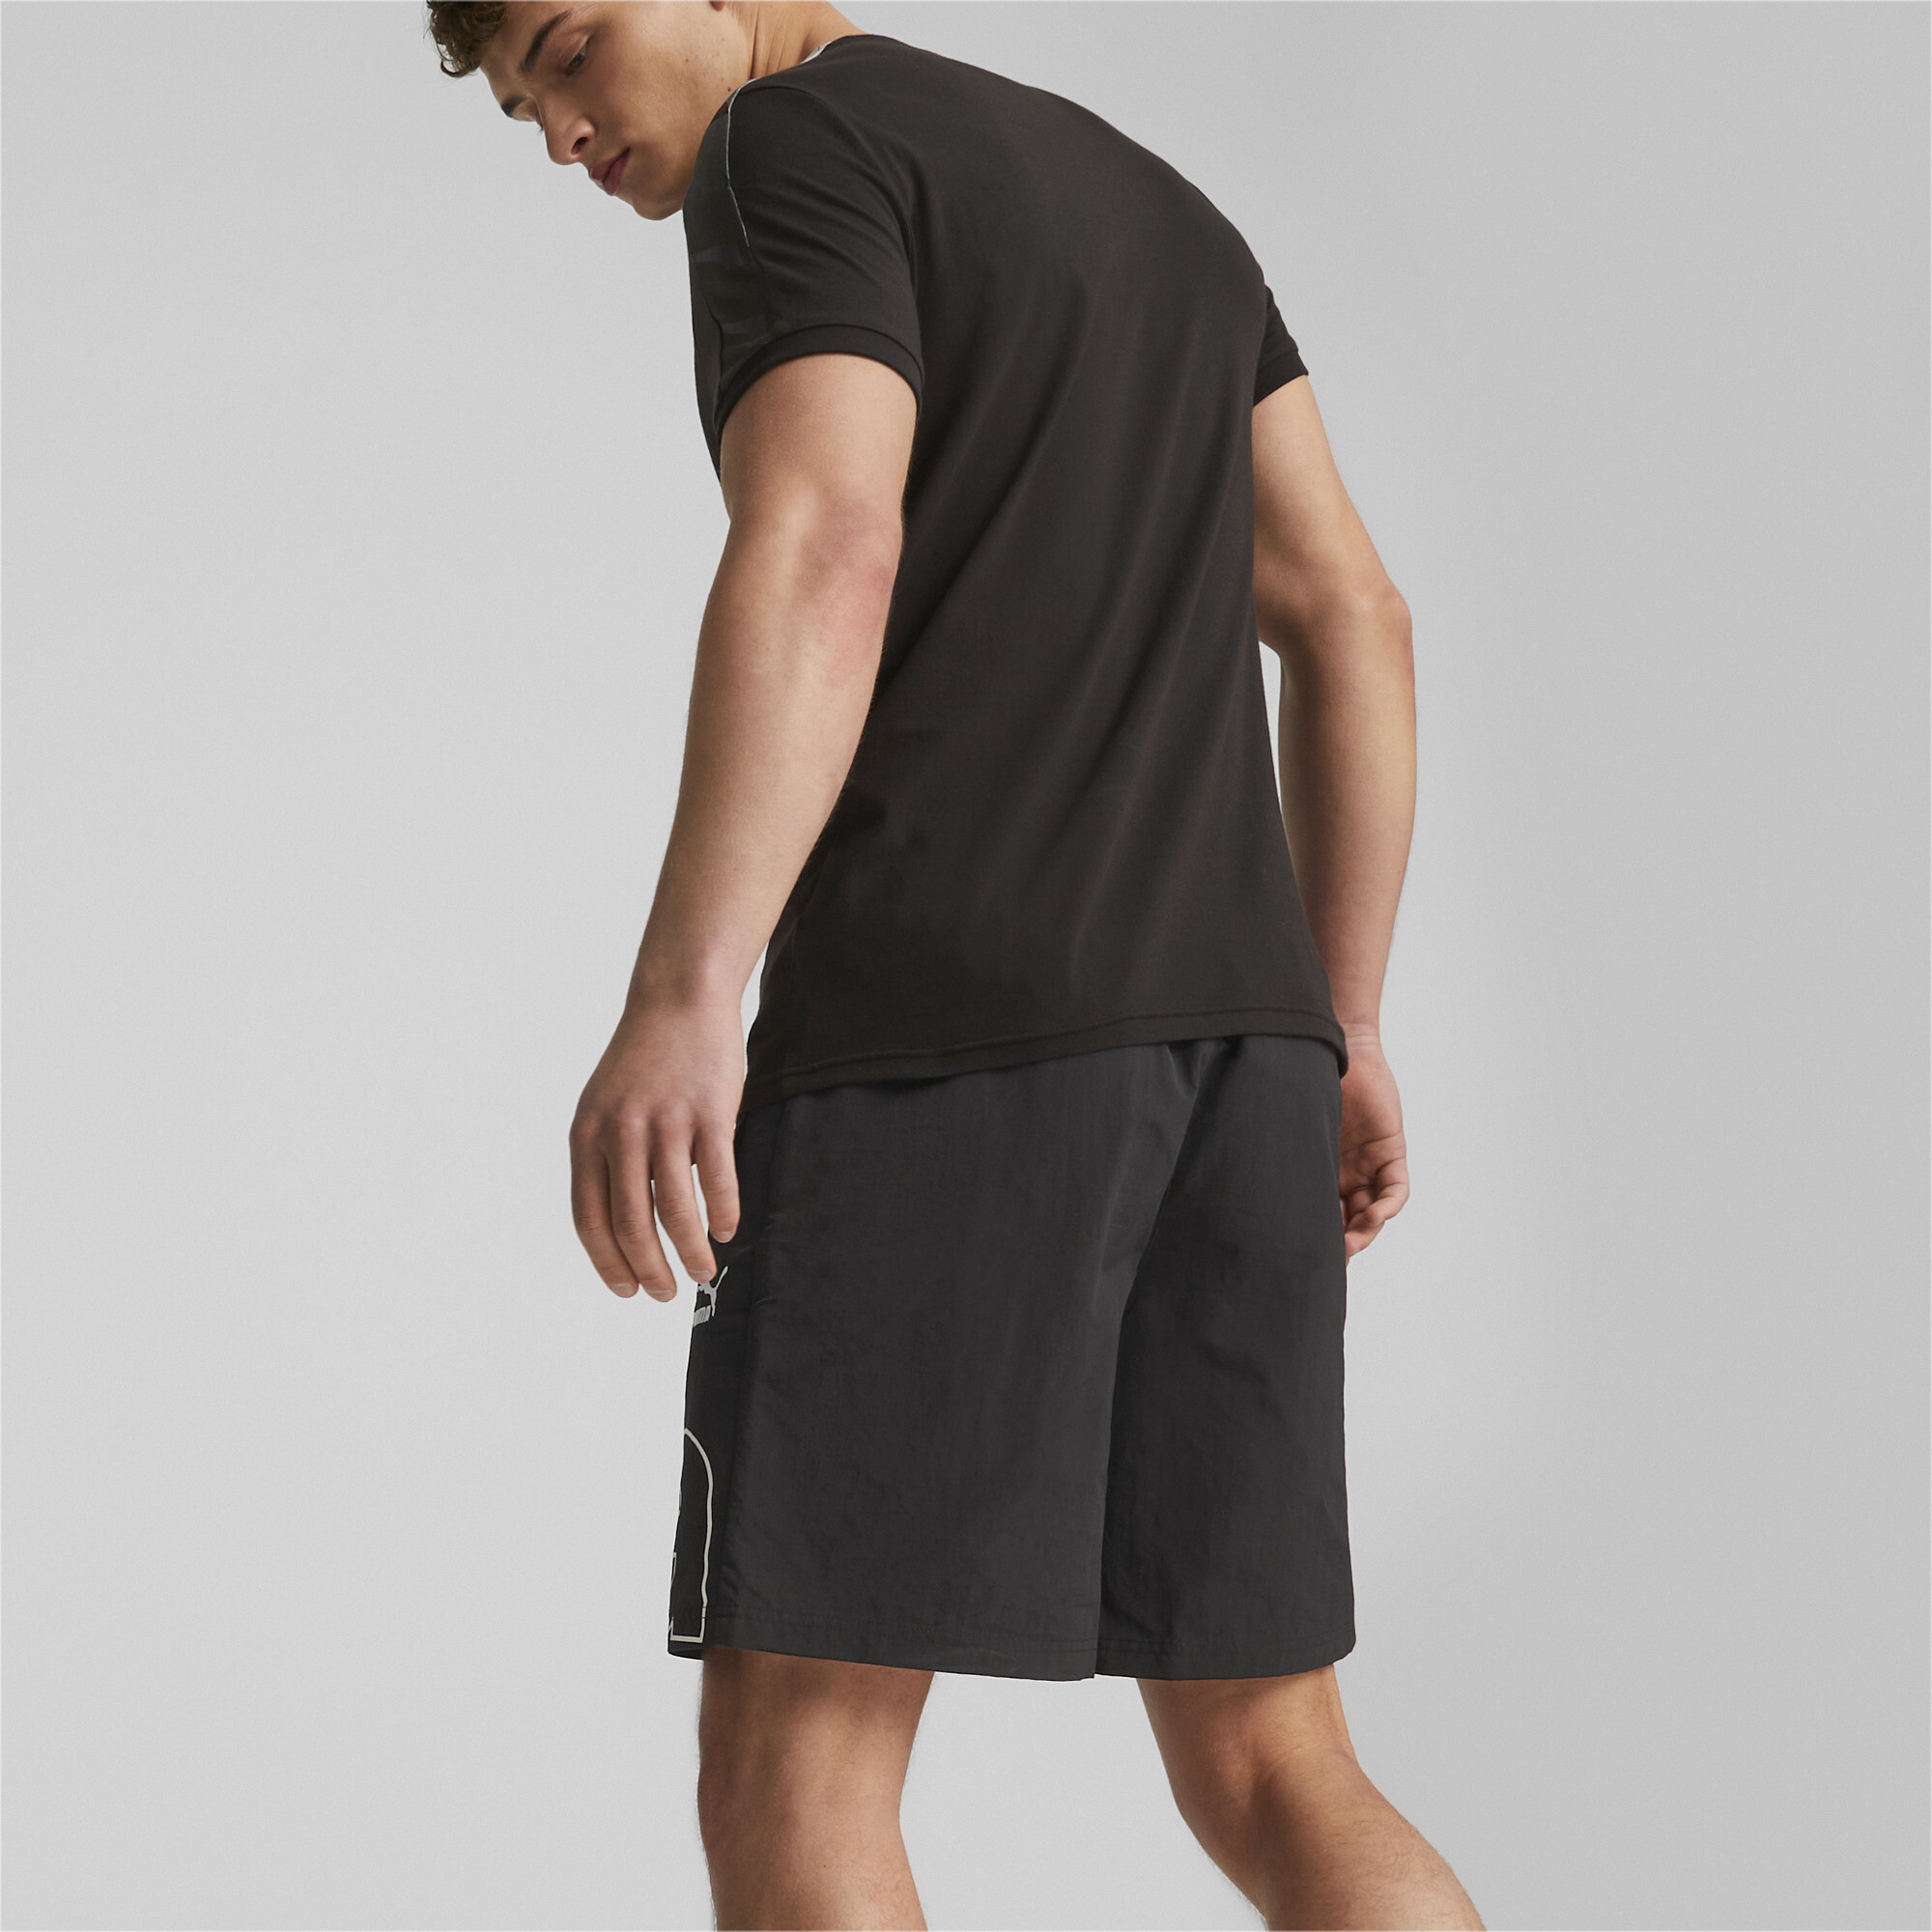 Men's PUMA TEAM Relaxed Shorts In Black, Size 2XL